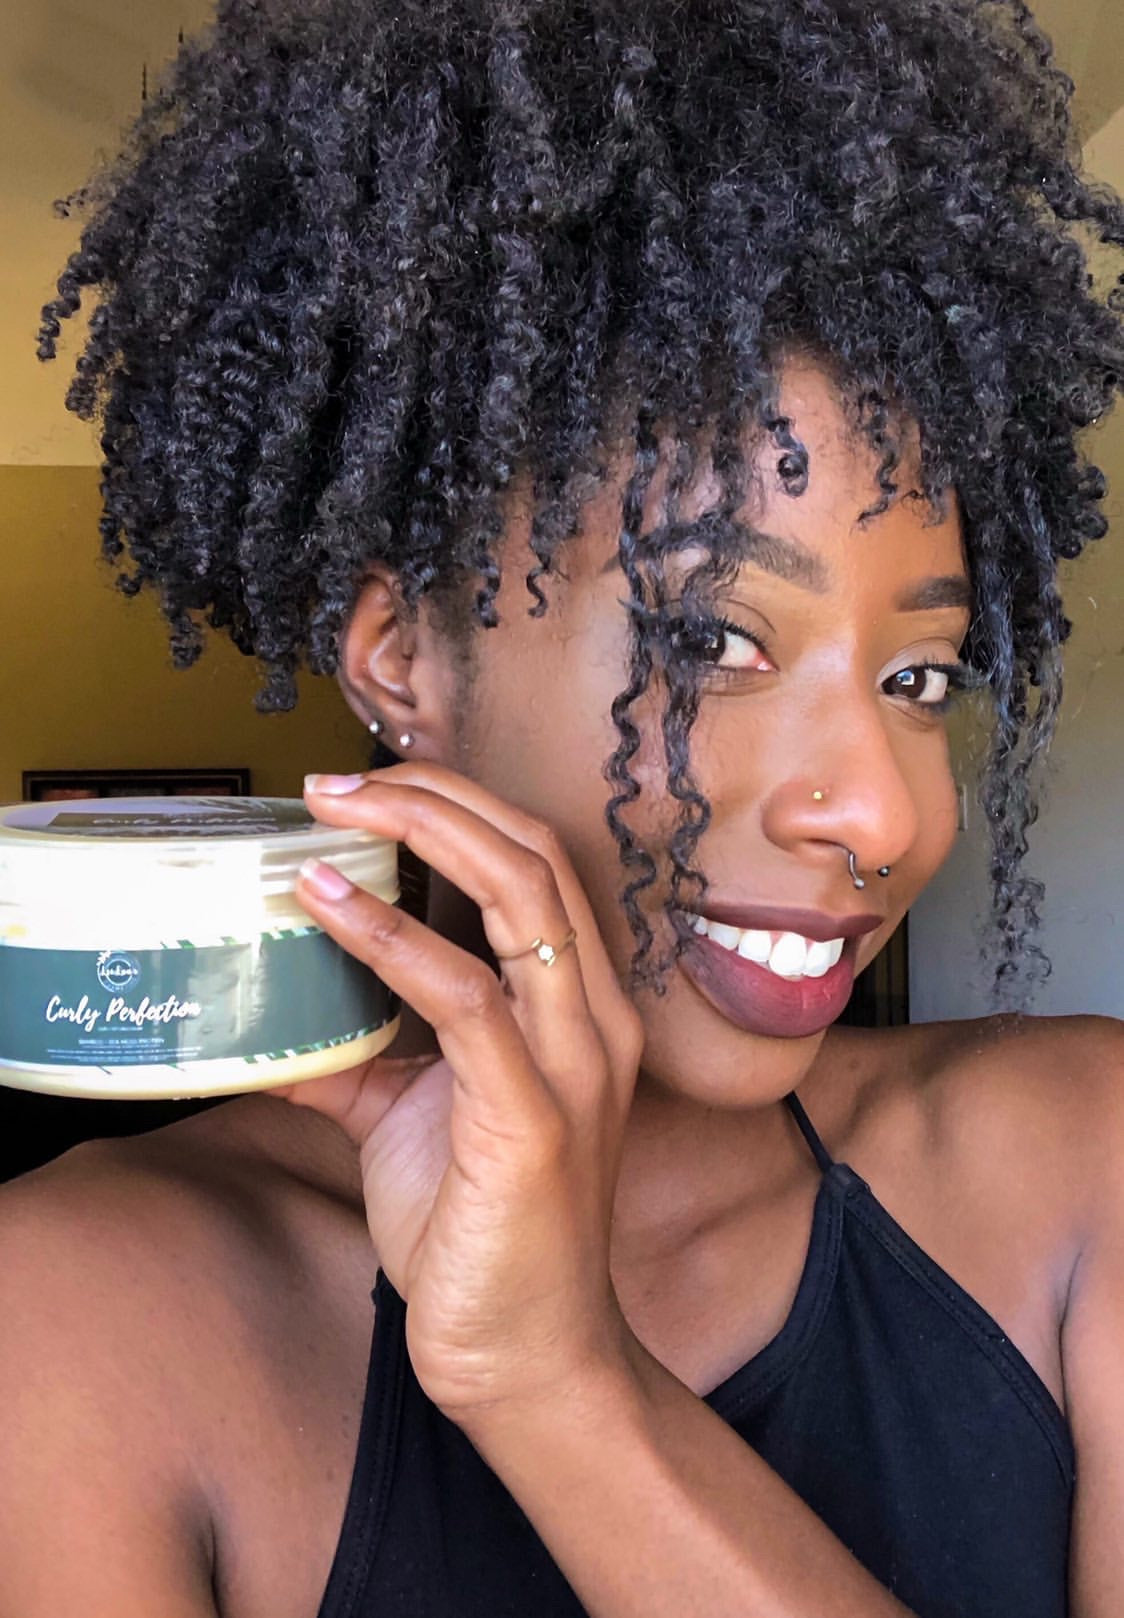 Curly Perfection Styling Cream